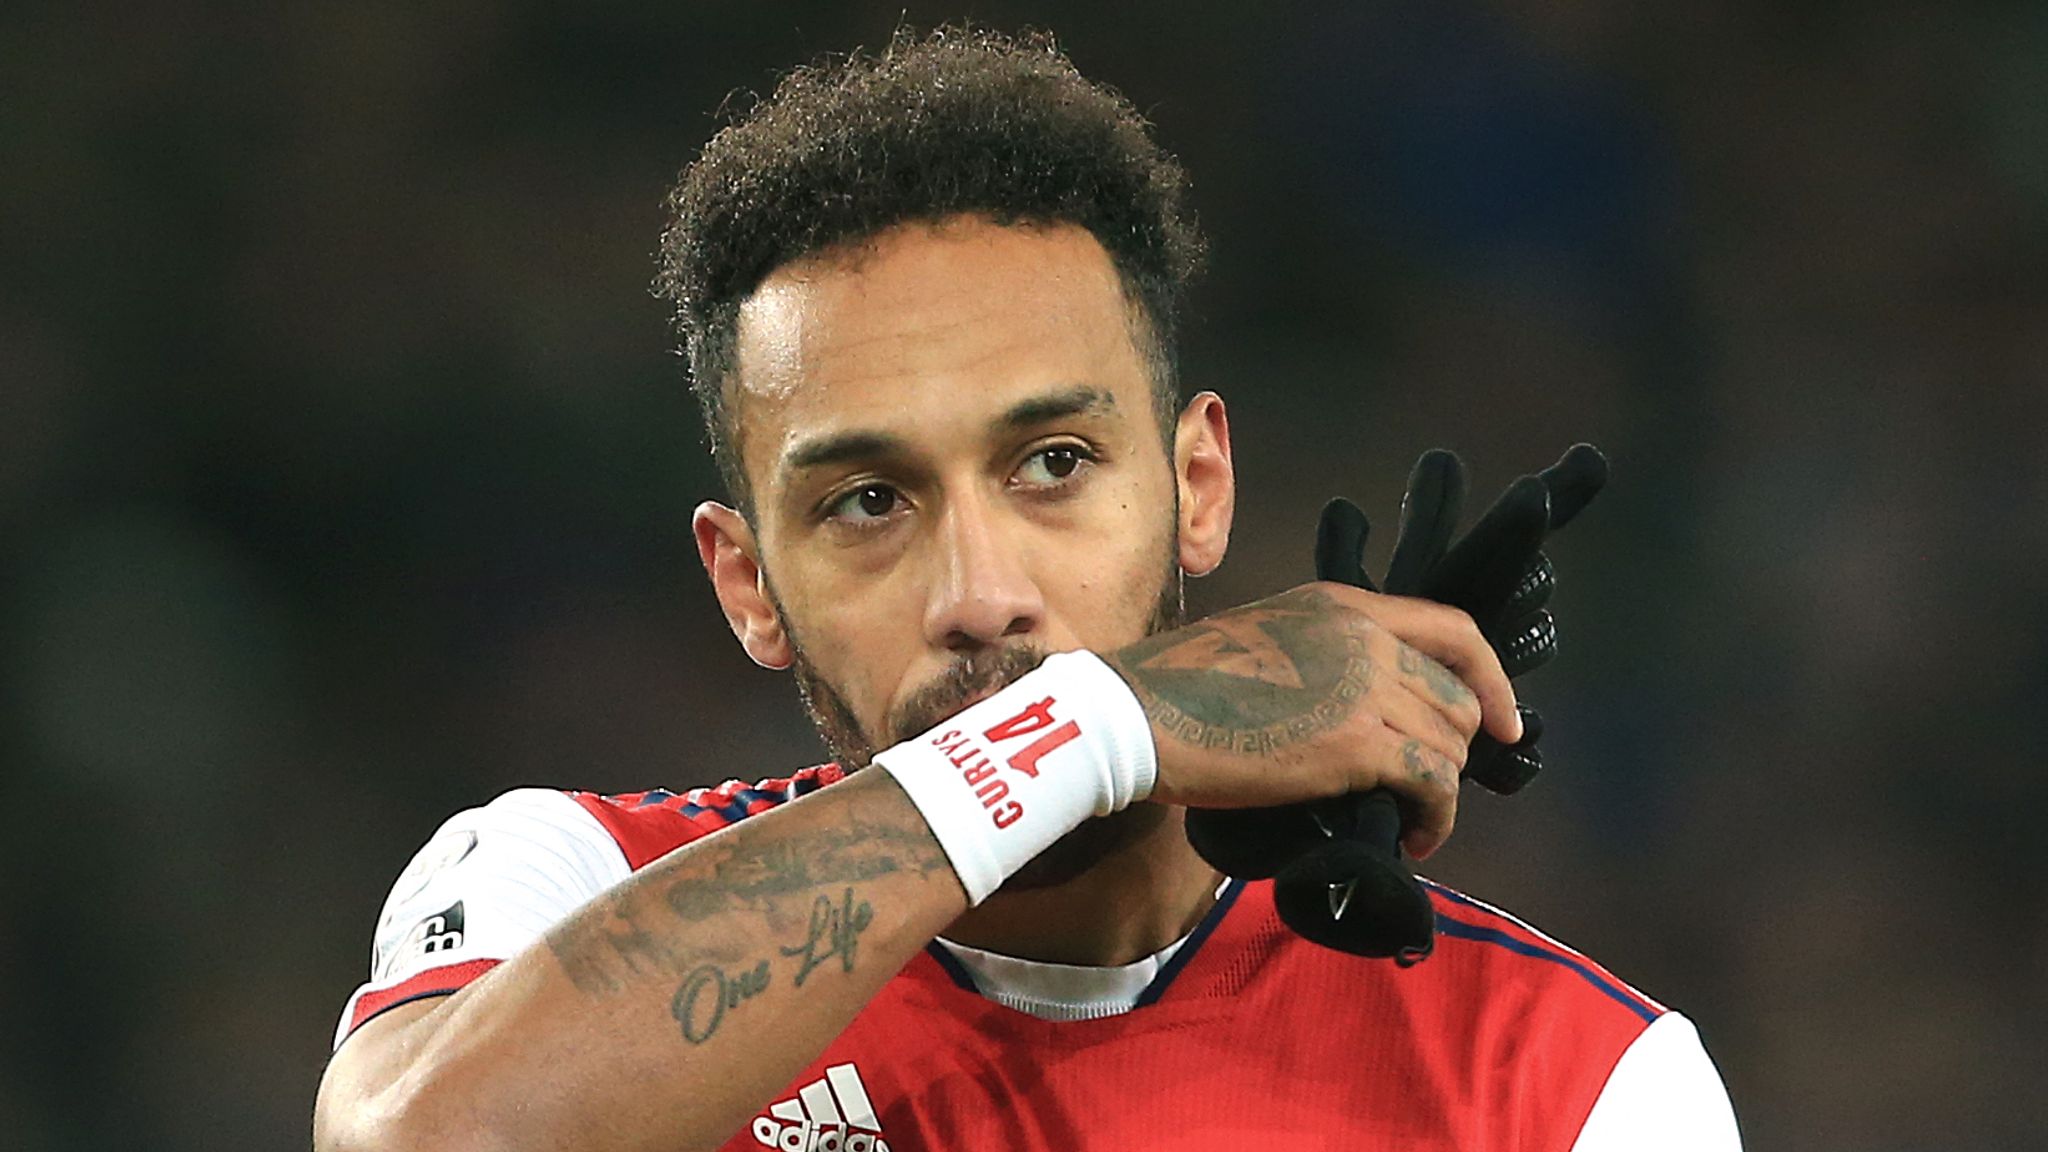 Pierre-Emerick Aubameyang faces being stripped of Arsenal captaincy after  being axed over 'disciplinary issue